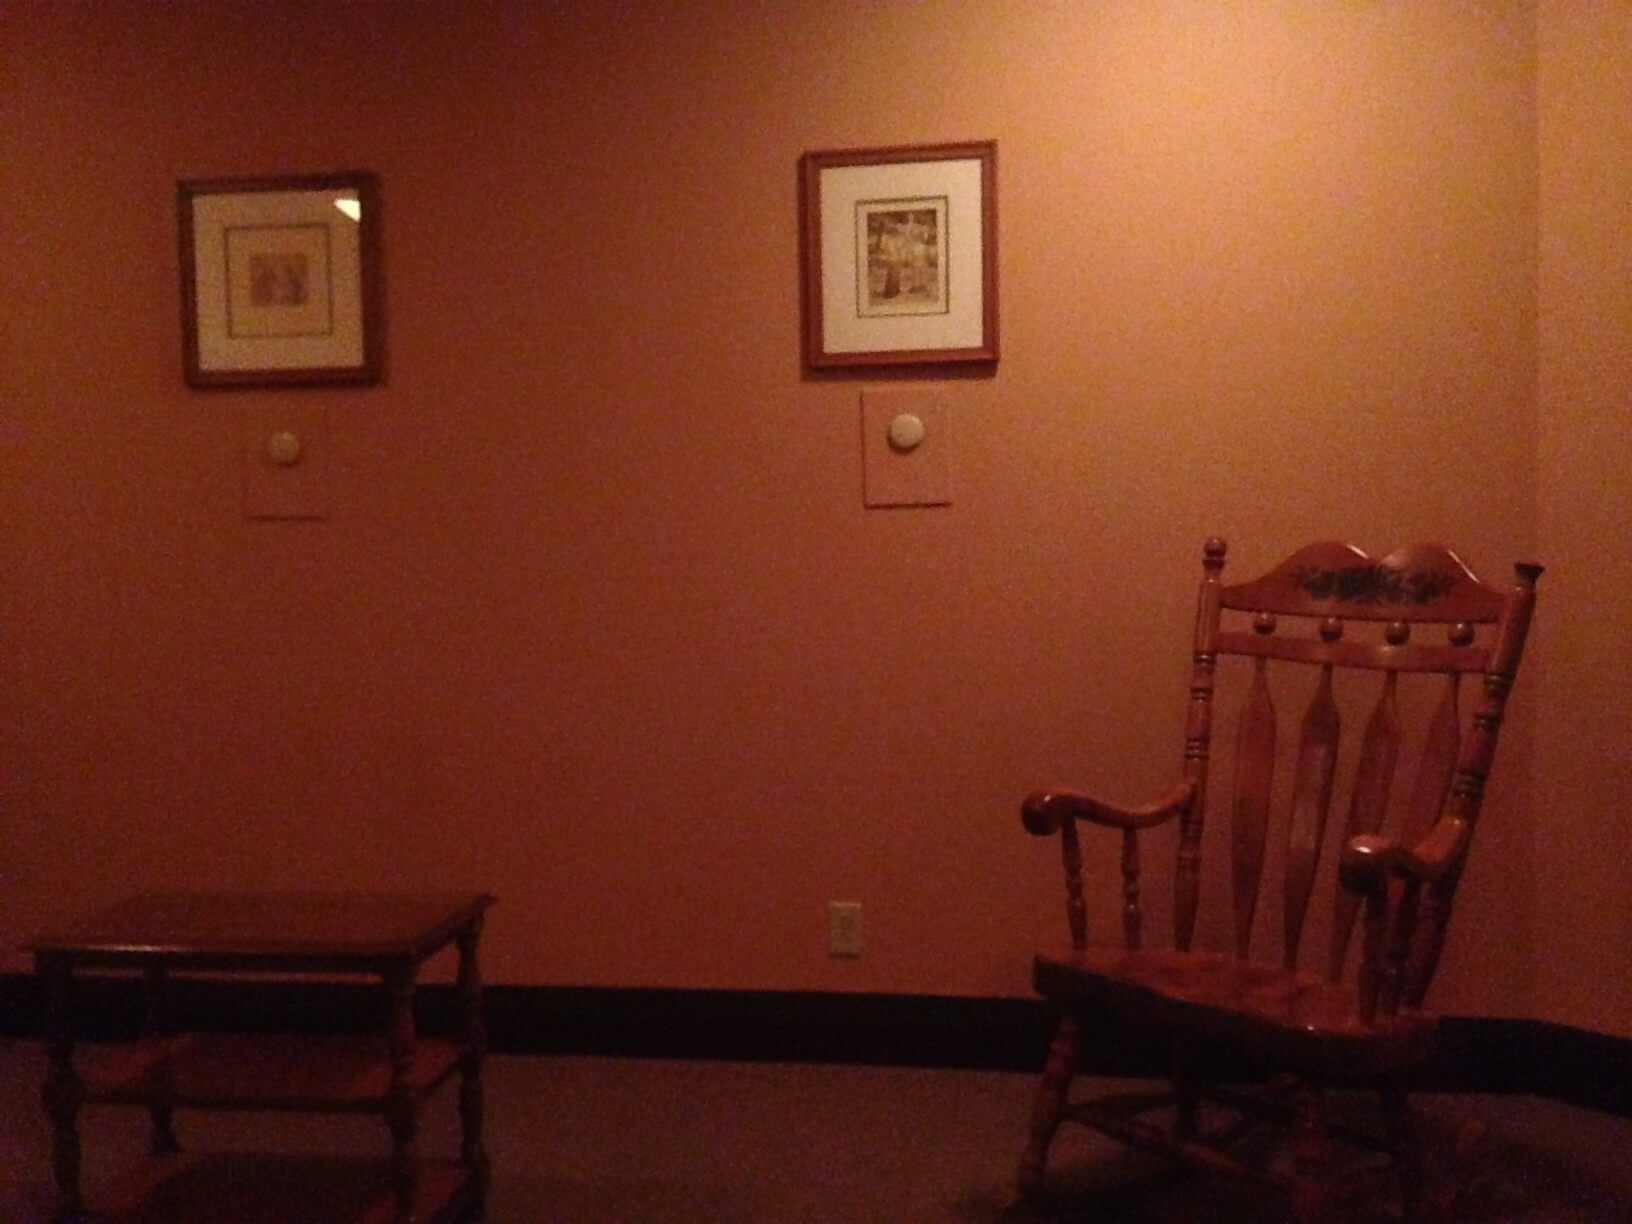 Rocking Chairs in the Nursing Mother's Room in the Baby Care Center in Epcot